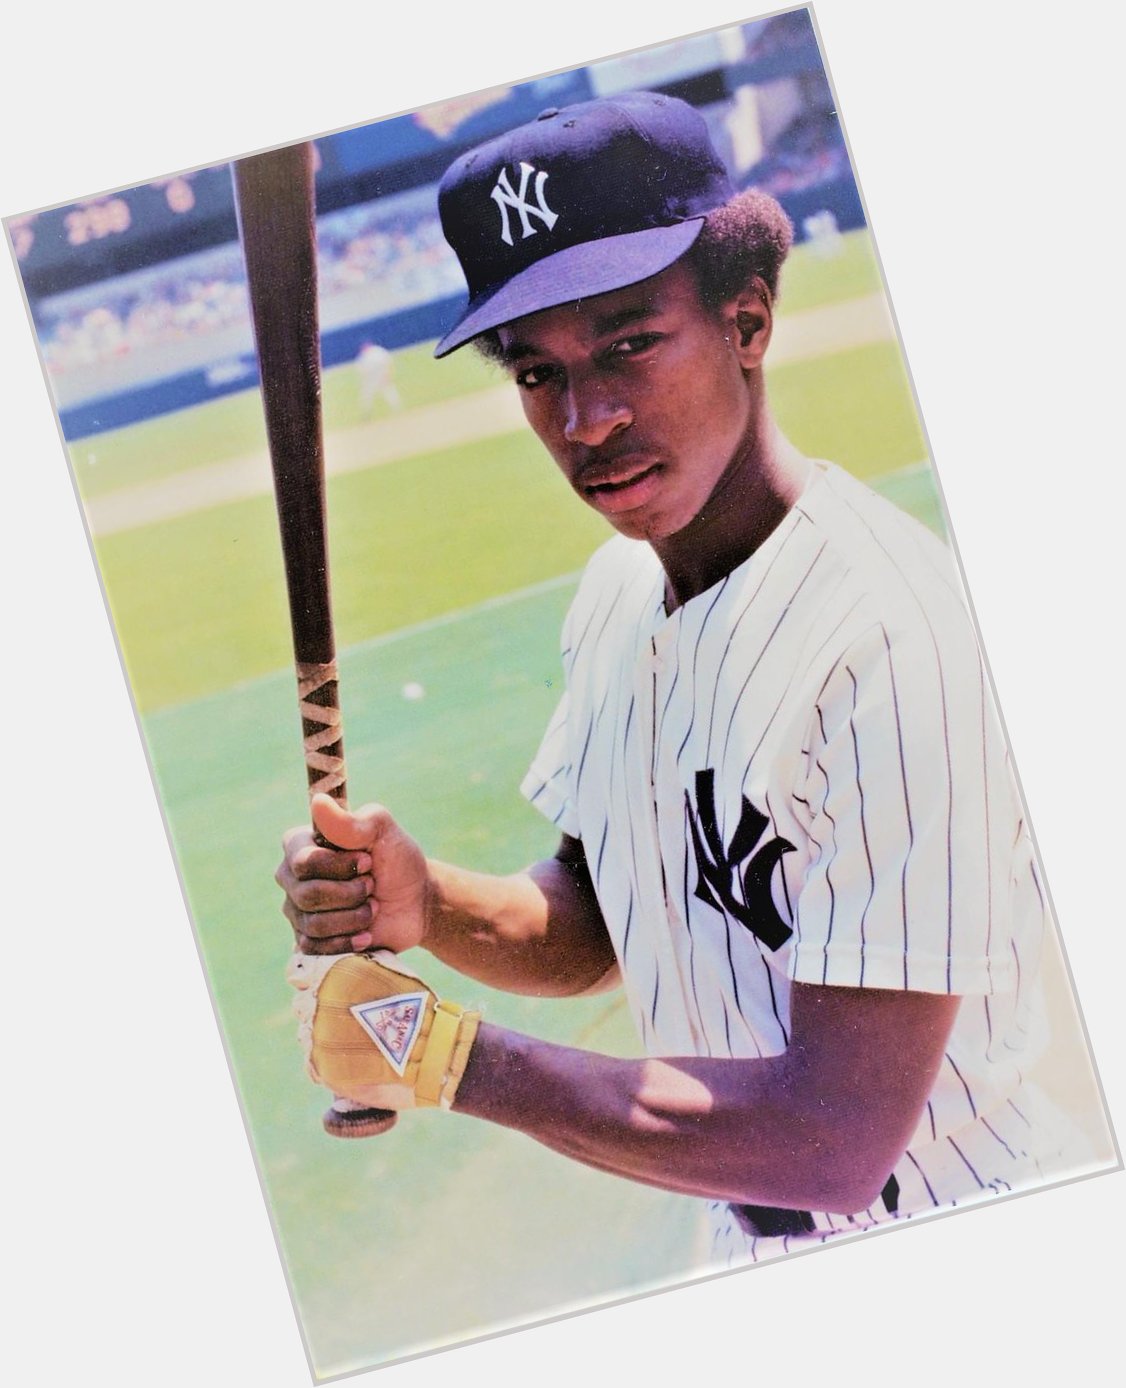 Happy birthday to former 6x All-Star and 6x World Series champion, Willie Randolph 